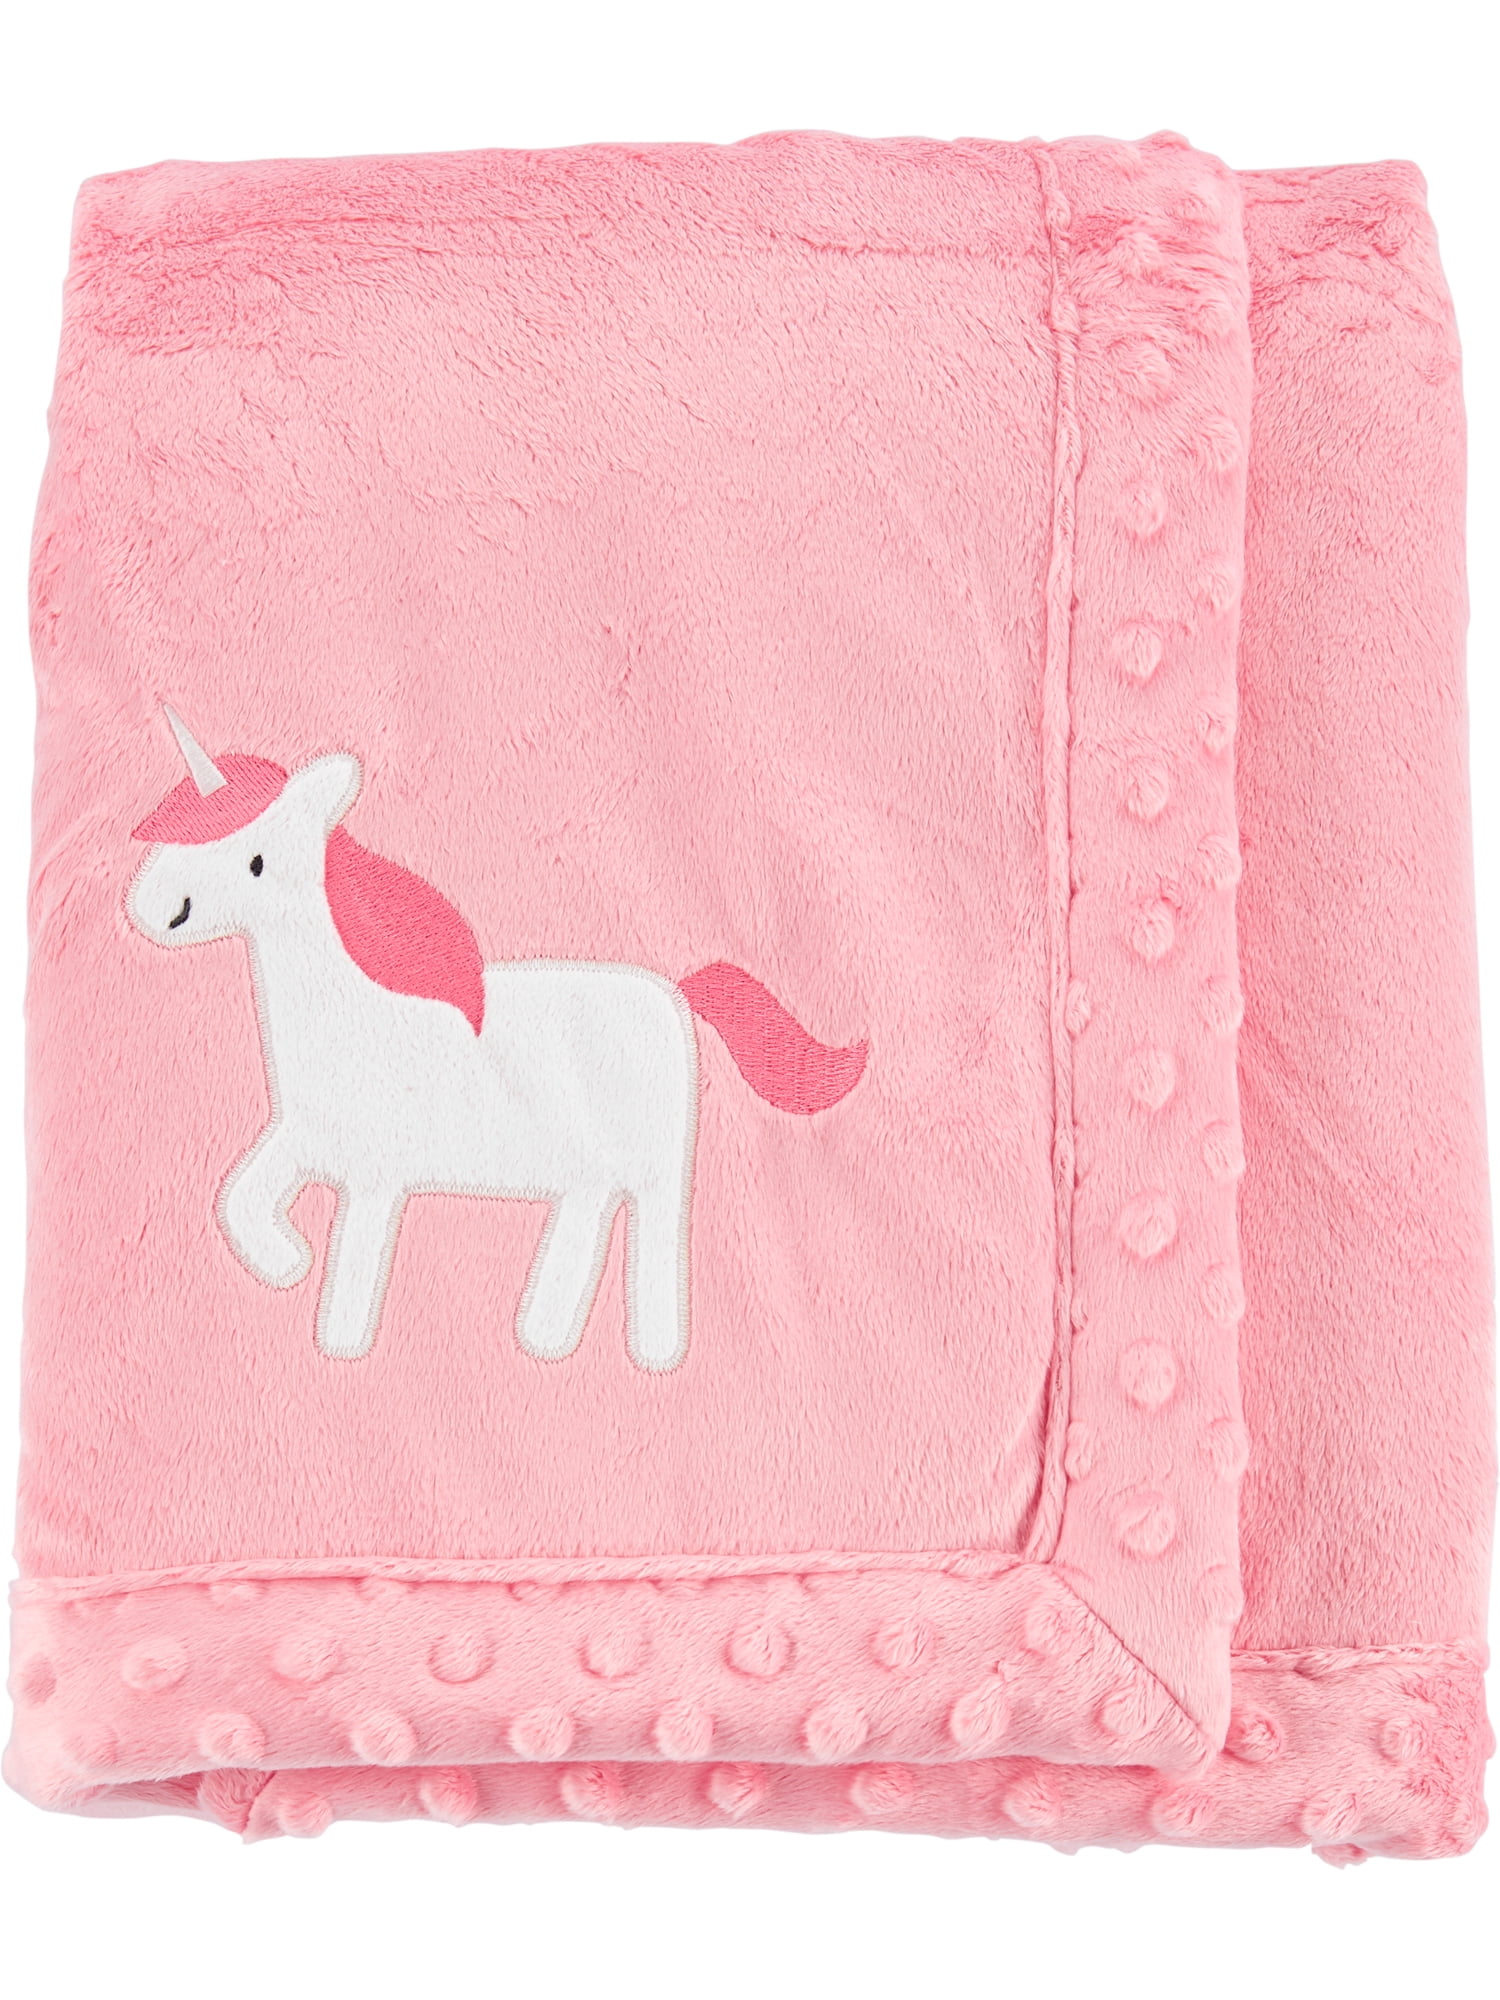 Carters Plush Toddler Blanket Colorful Rainbows 